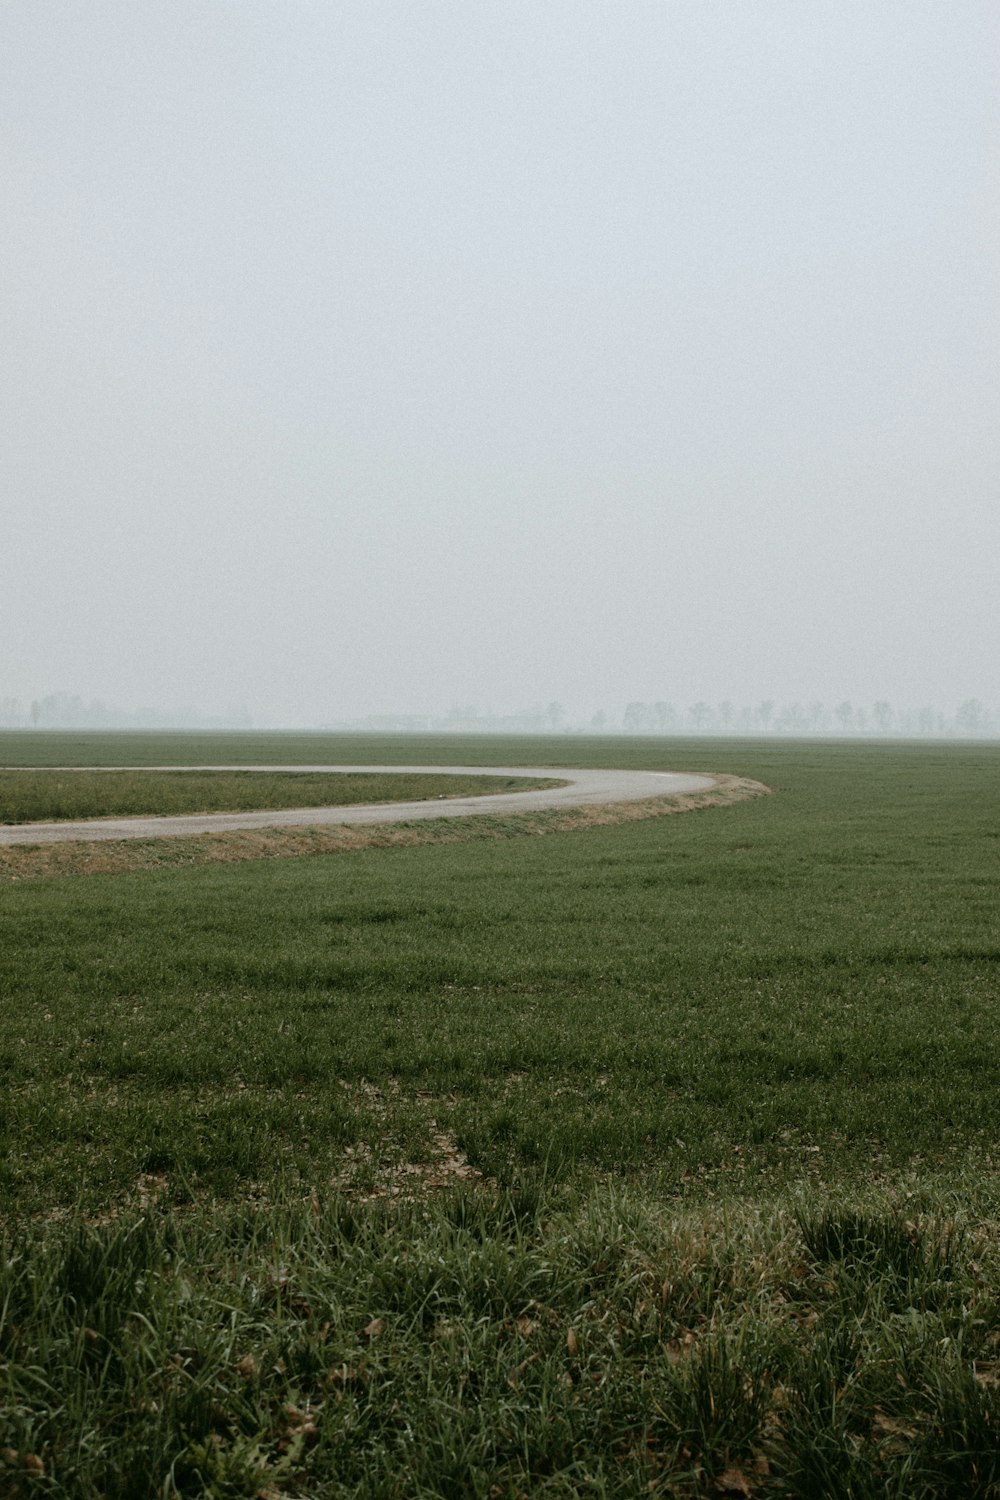 a field of grass with a road in the distance